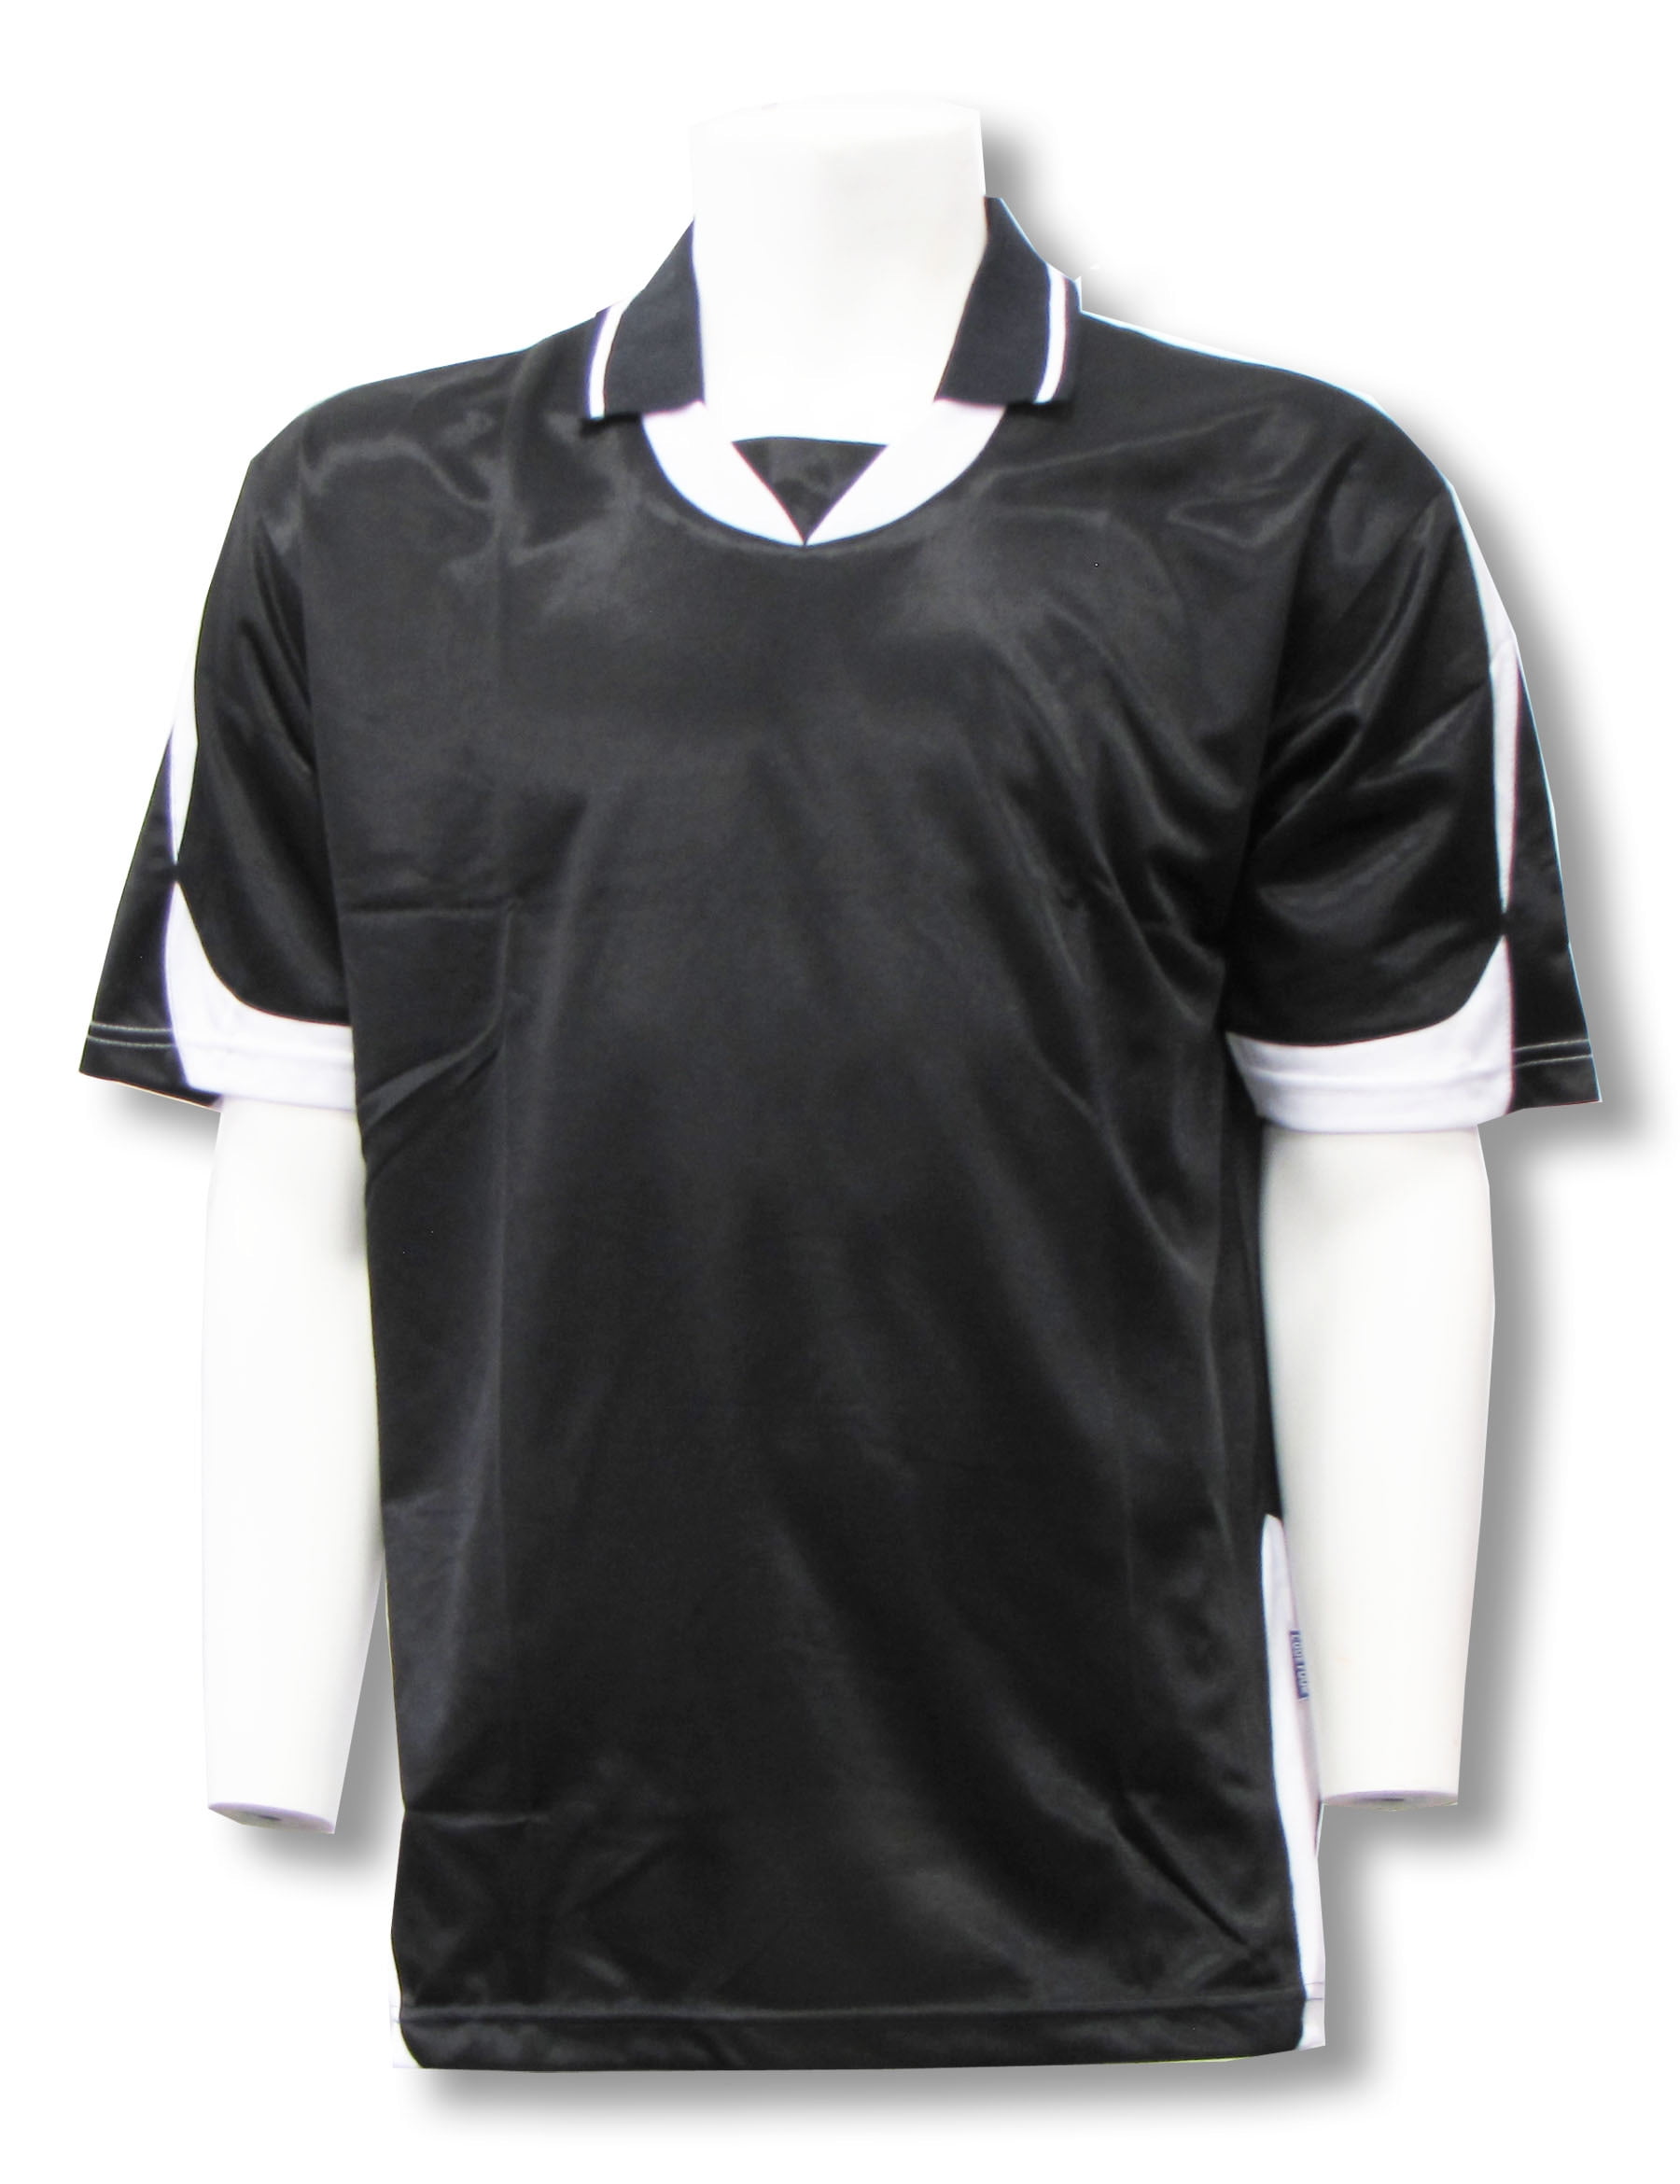 collared soccer jersey